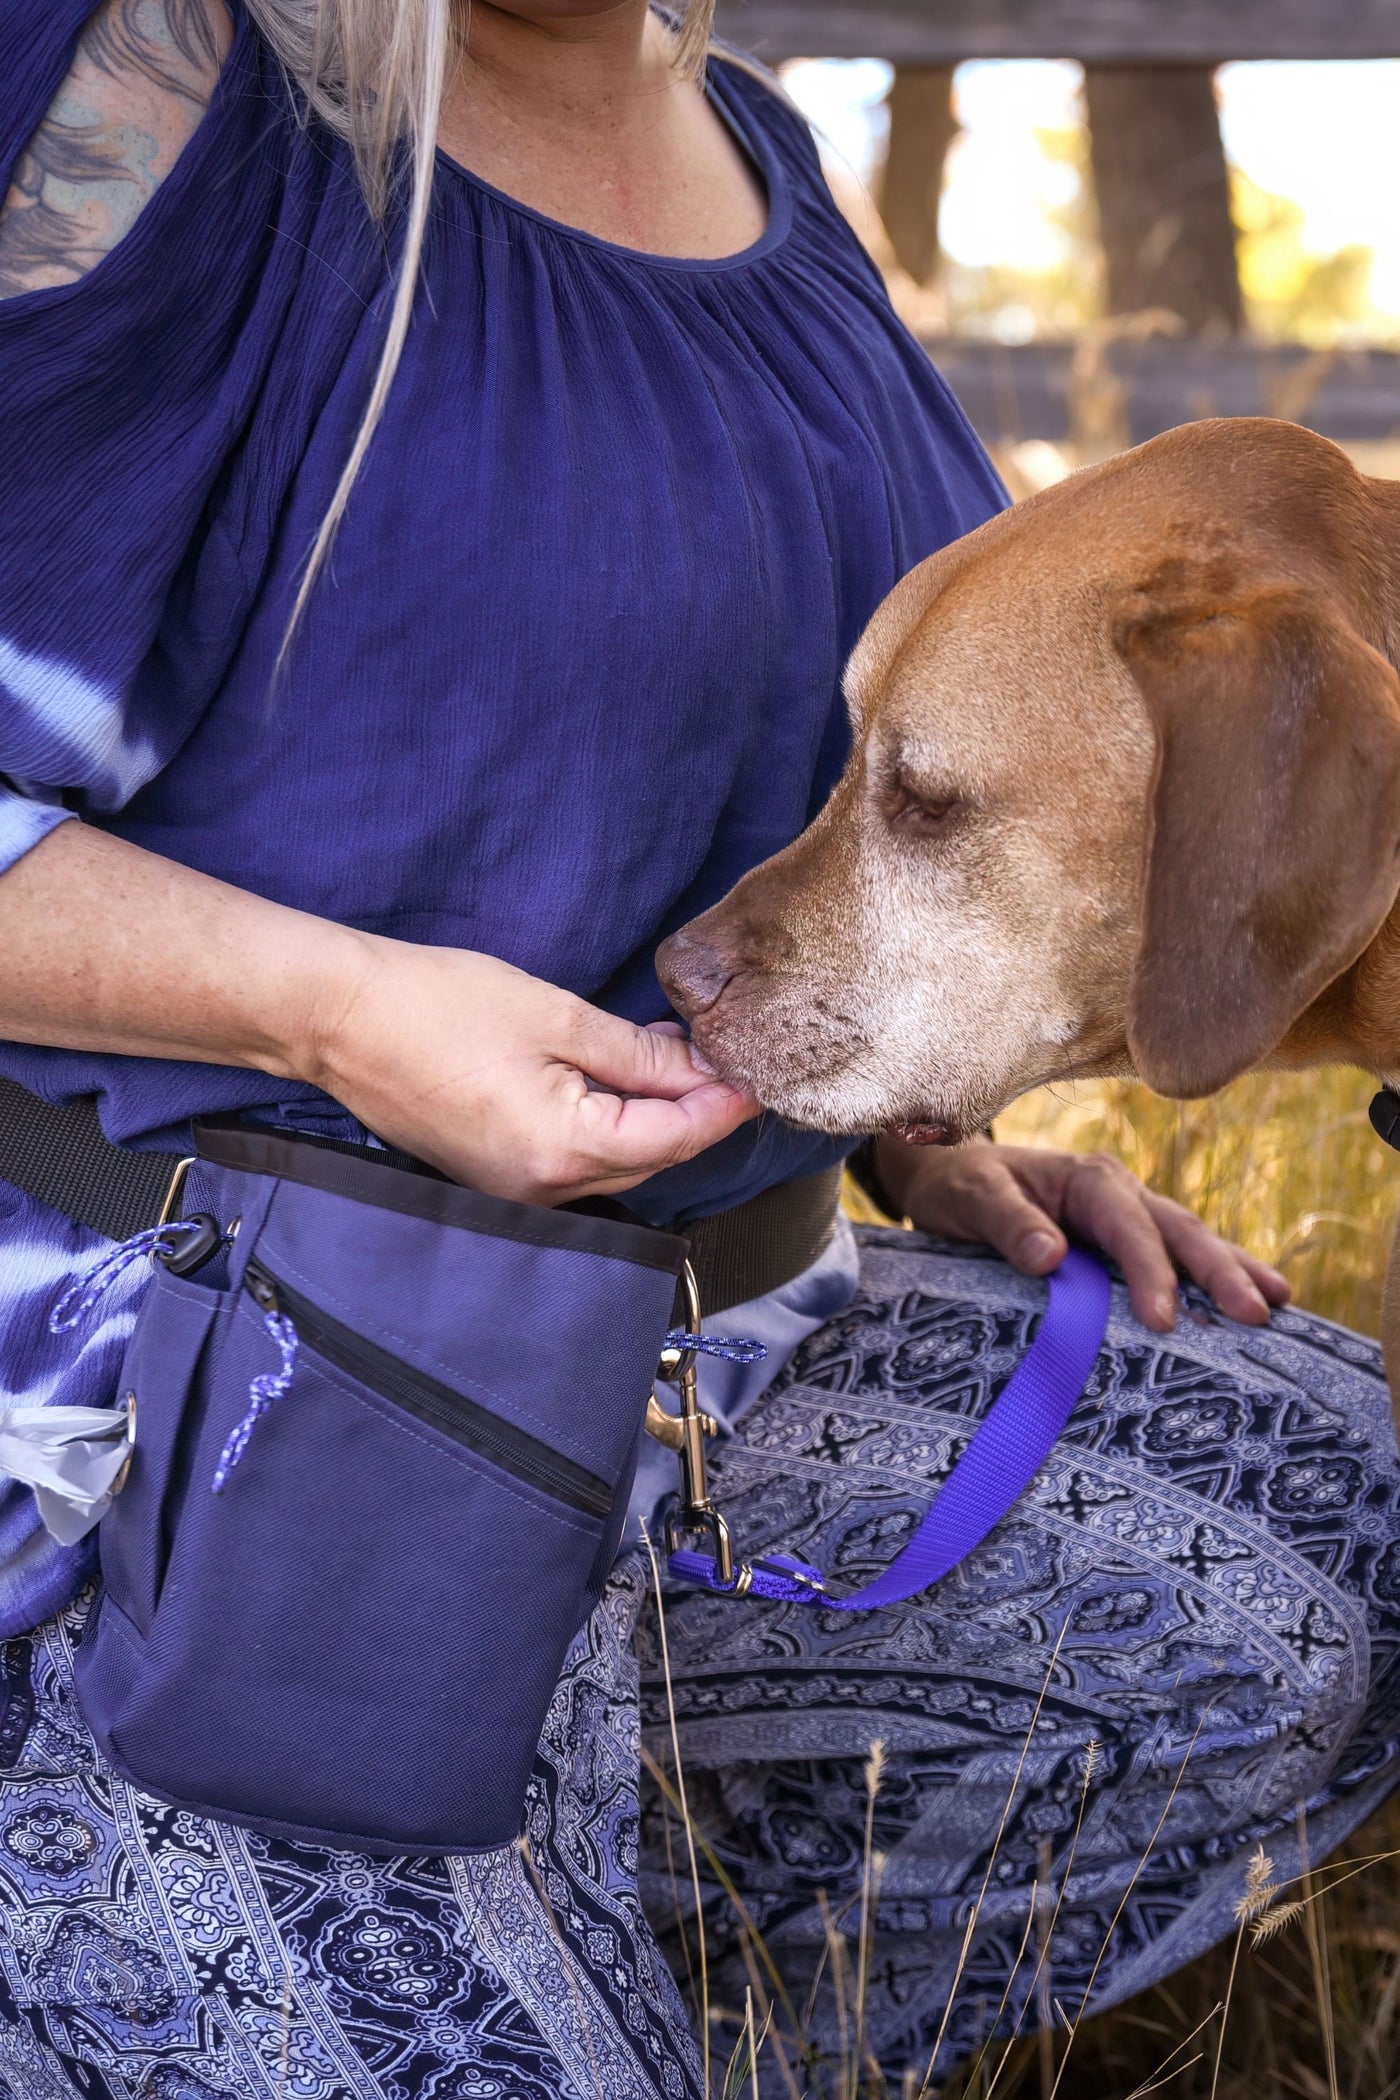 Extra large treat bag in navy blue with a zip front pocket shown with an adult female handing an apricot colored mixed breed dog treats from the training pouch.